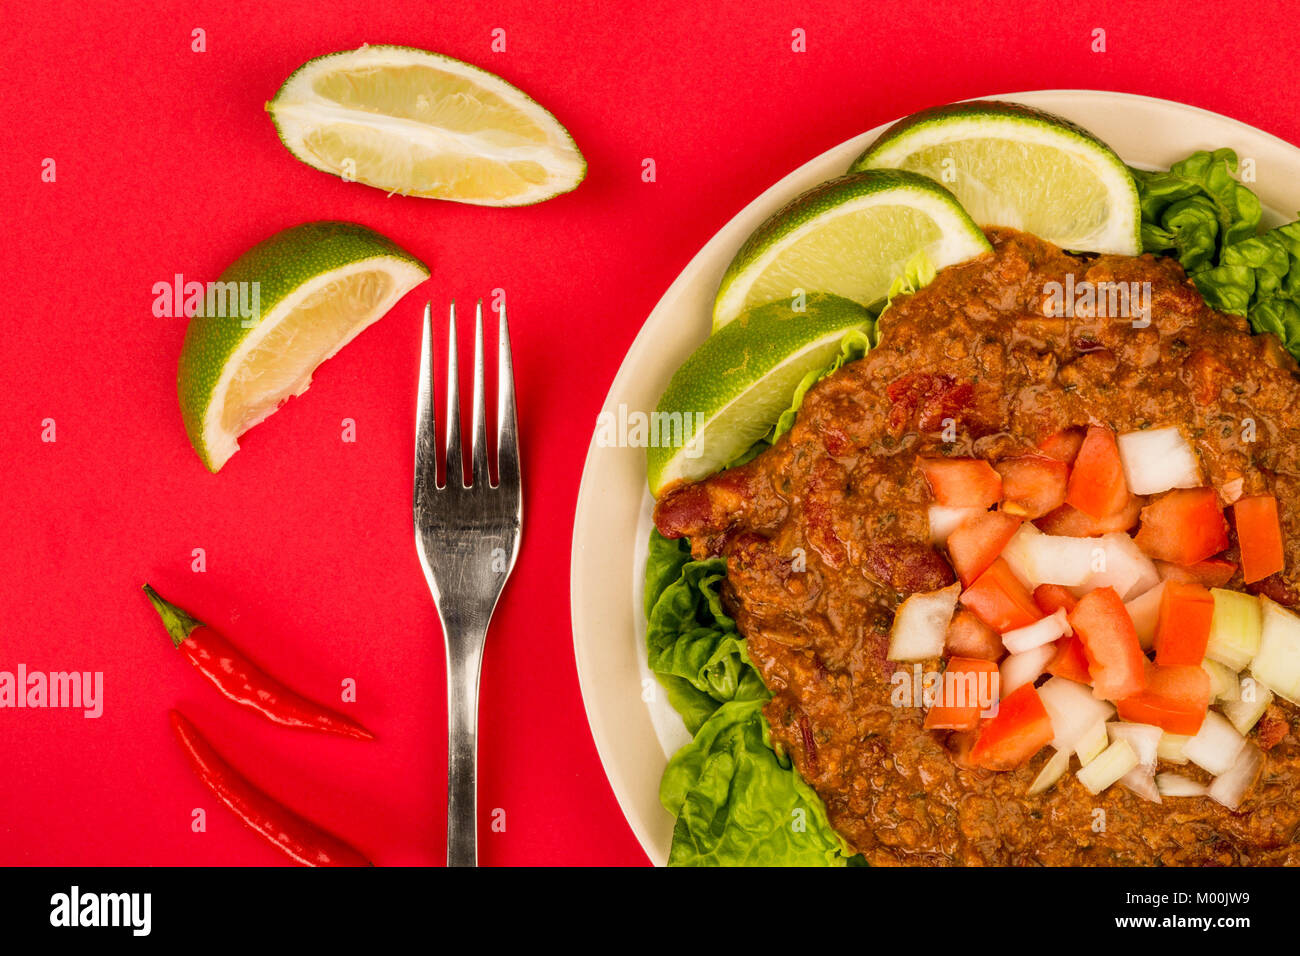 Spicy Mexican Style Beef Taco Meat and Salad With Fresh Limes Against A Red Background Stock Photo